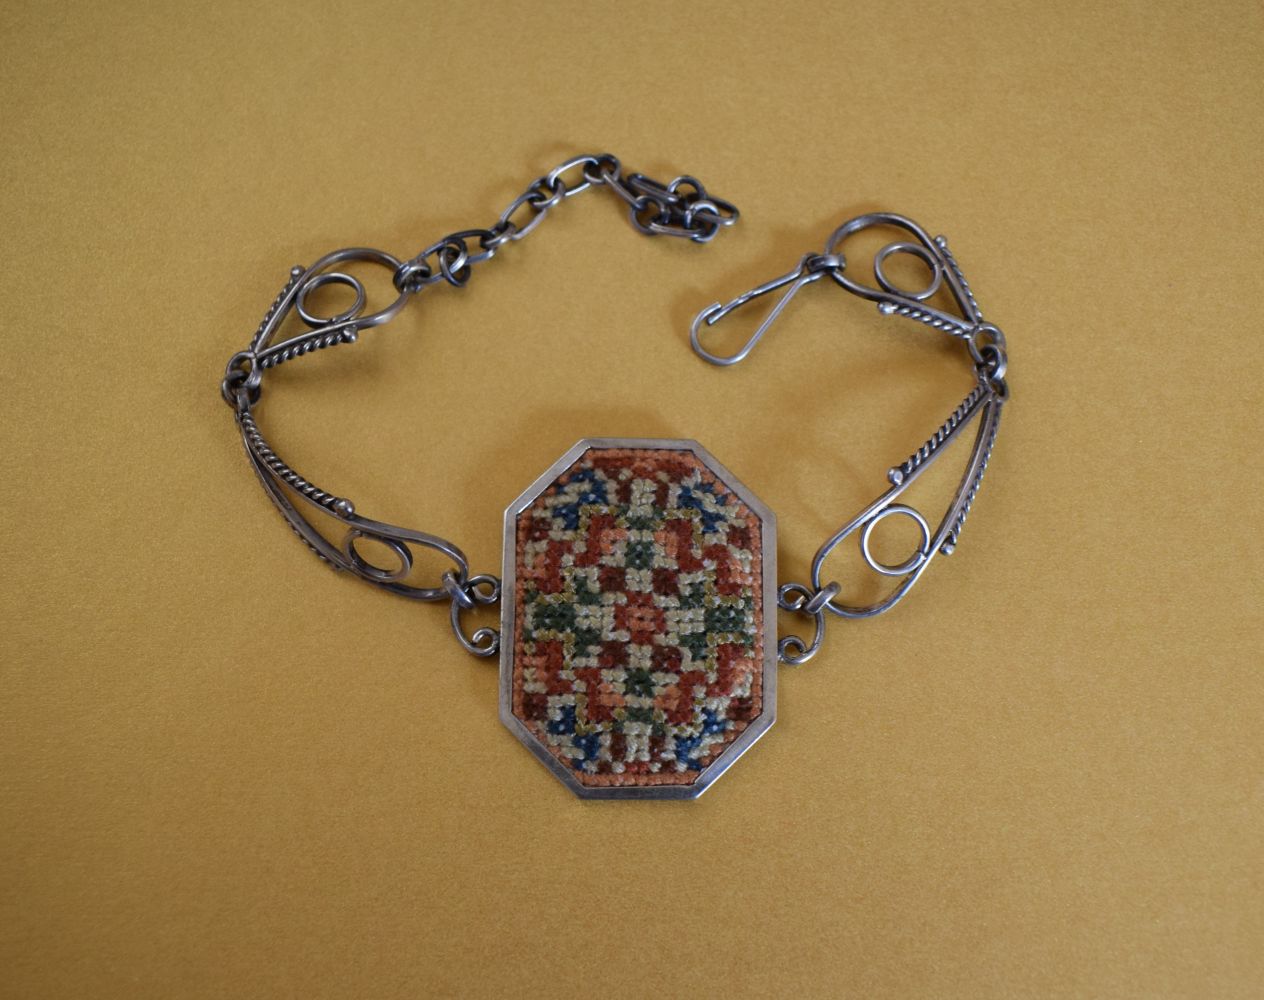 Embroided Silver Bracelet with Armenian Ornaments